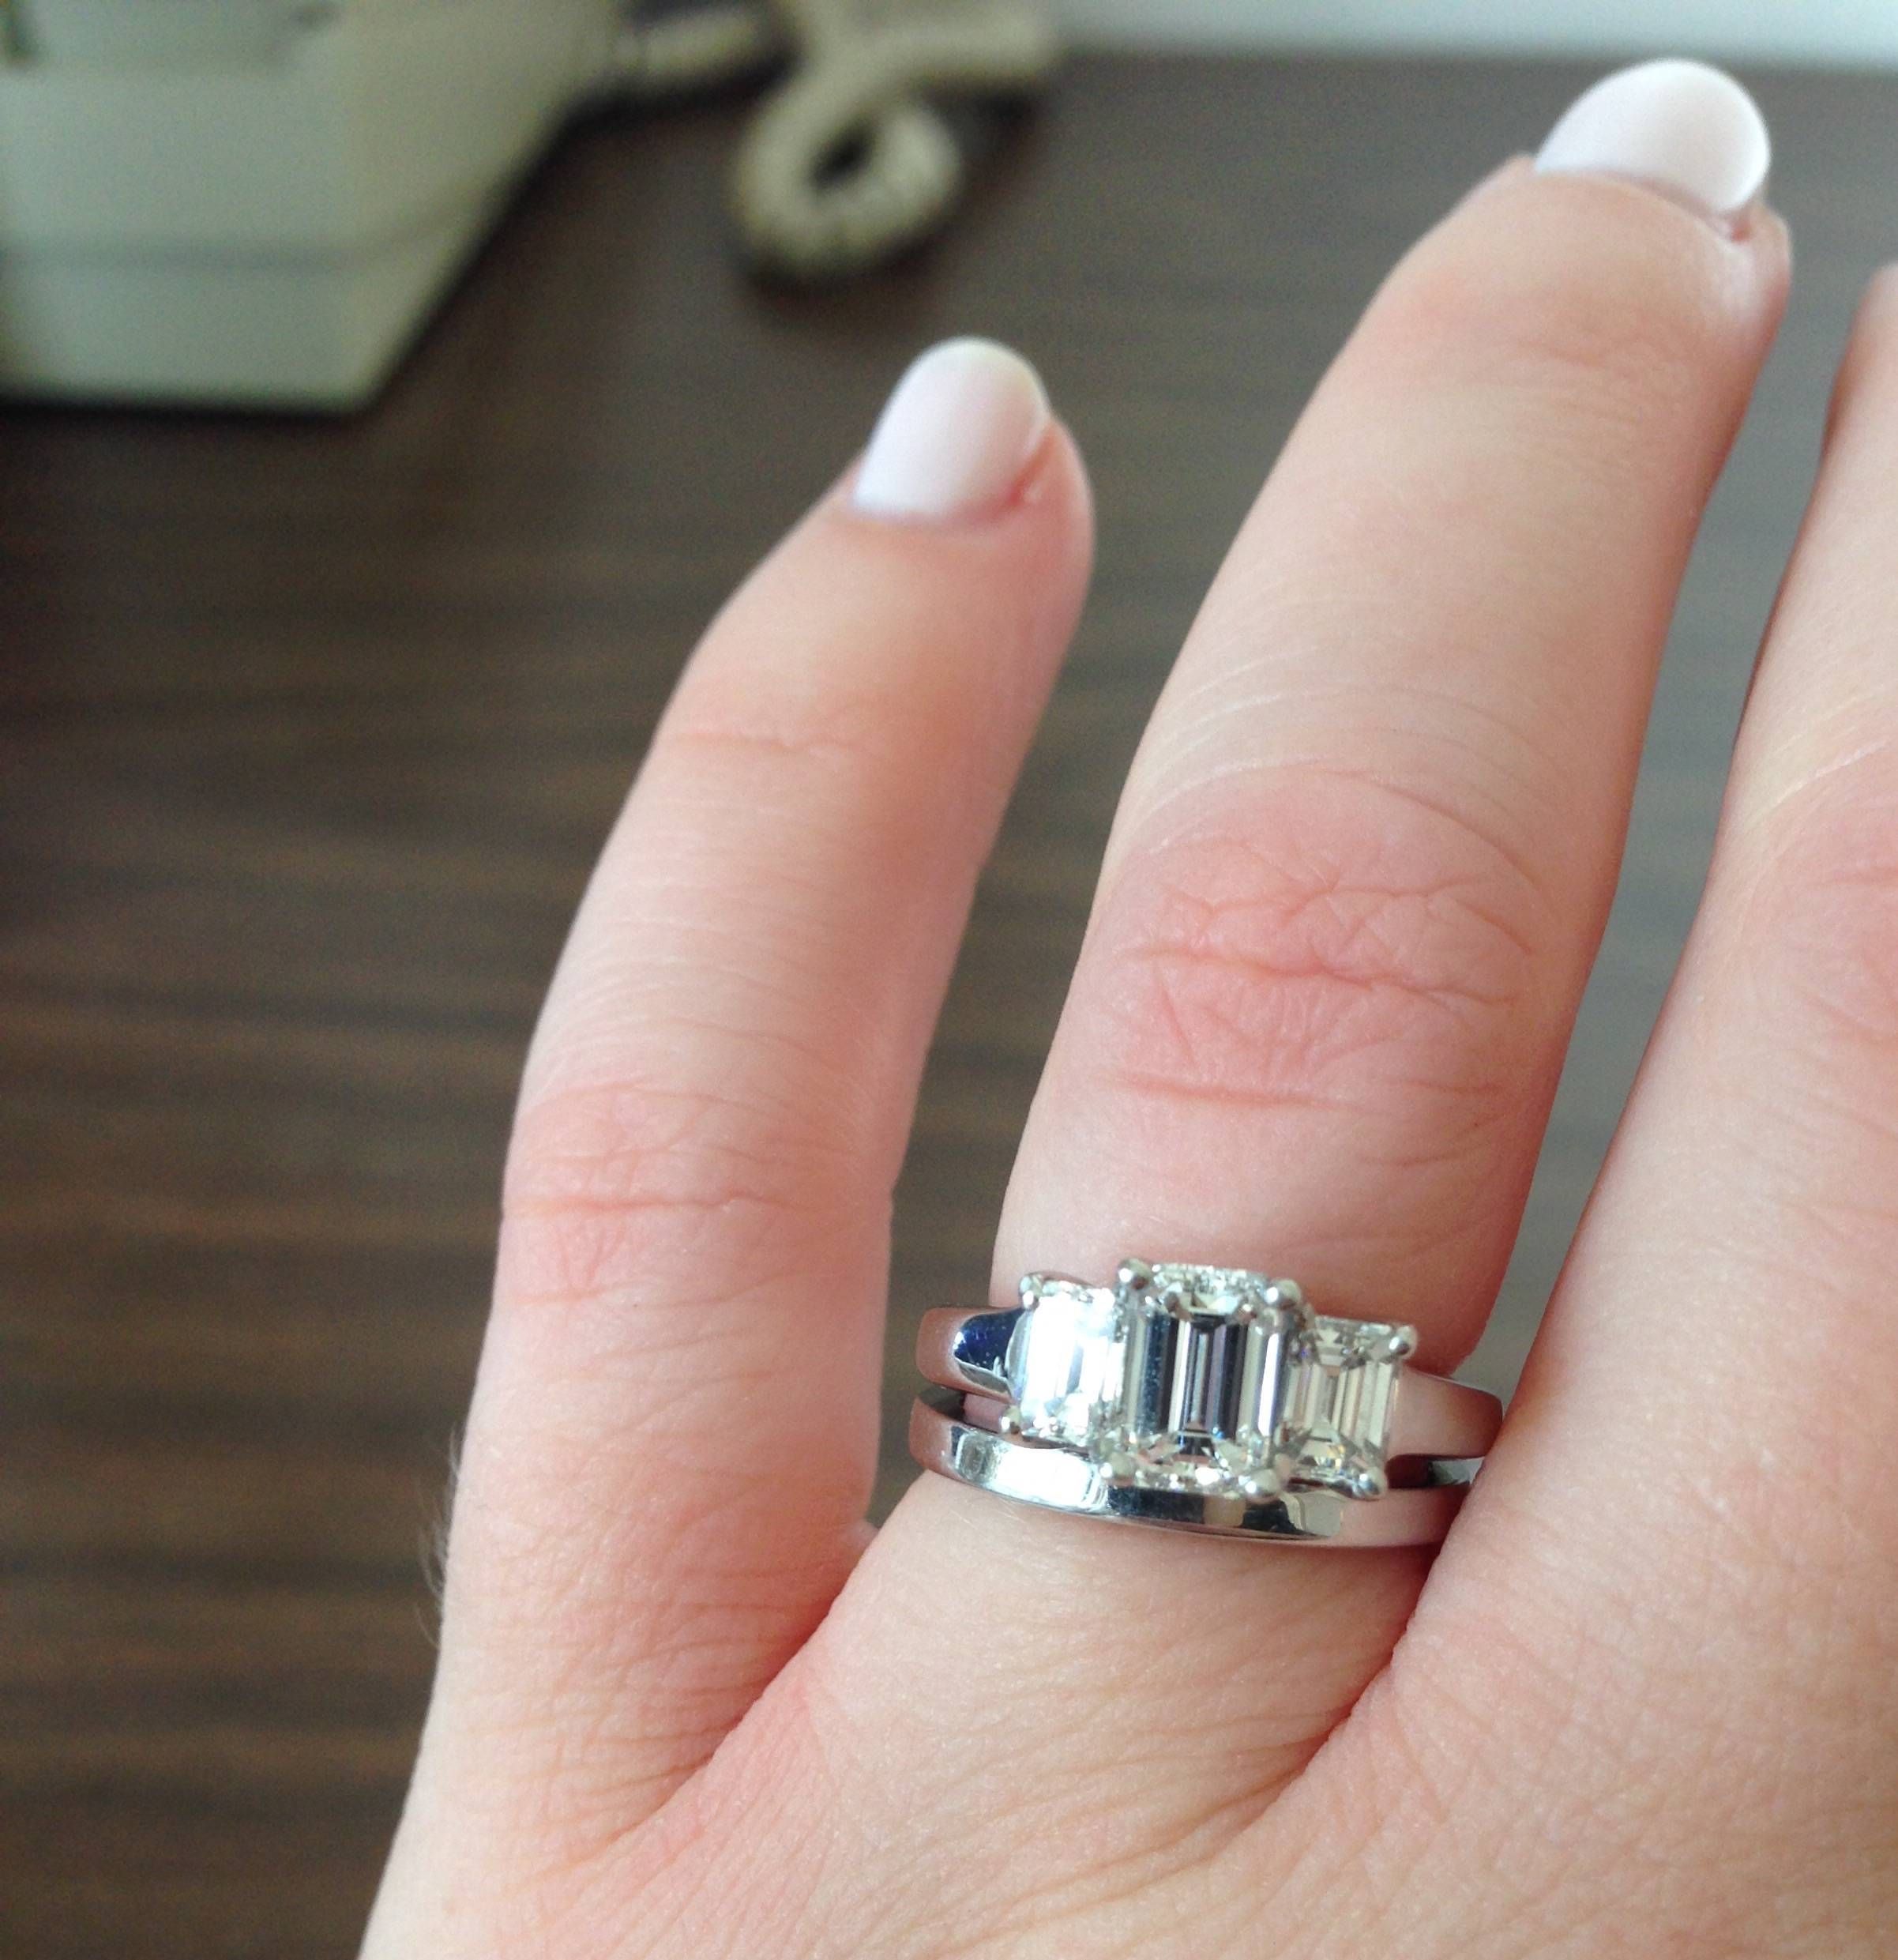 Can I See Your Wedding Band With 3 Stone Engagement Rings With Regard To 3 Band Engagement Rings (View 11 of 15)